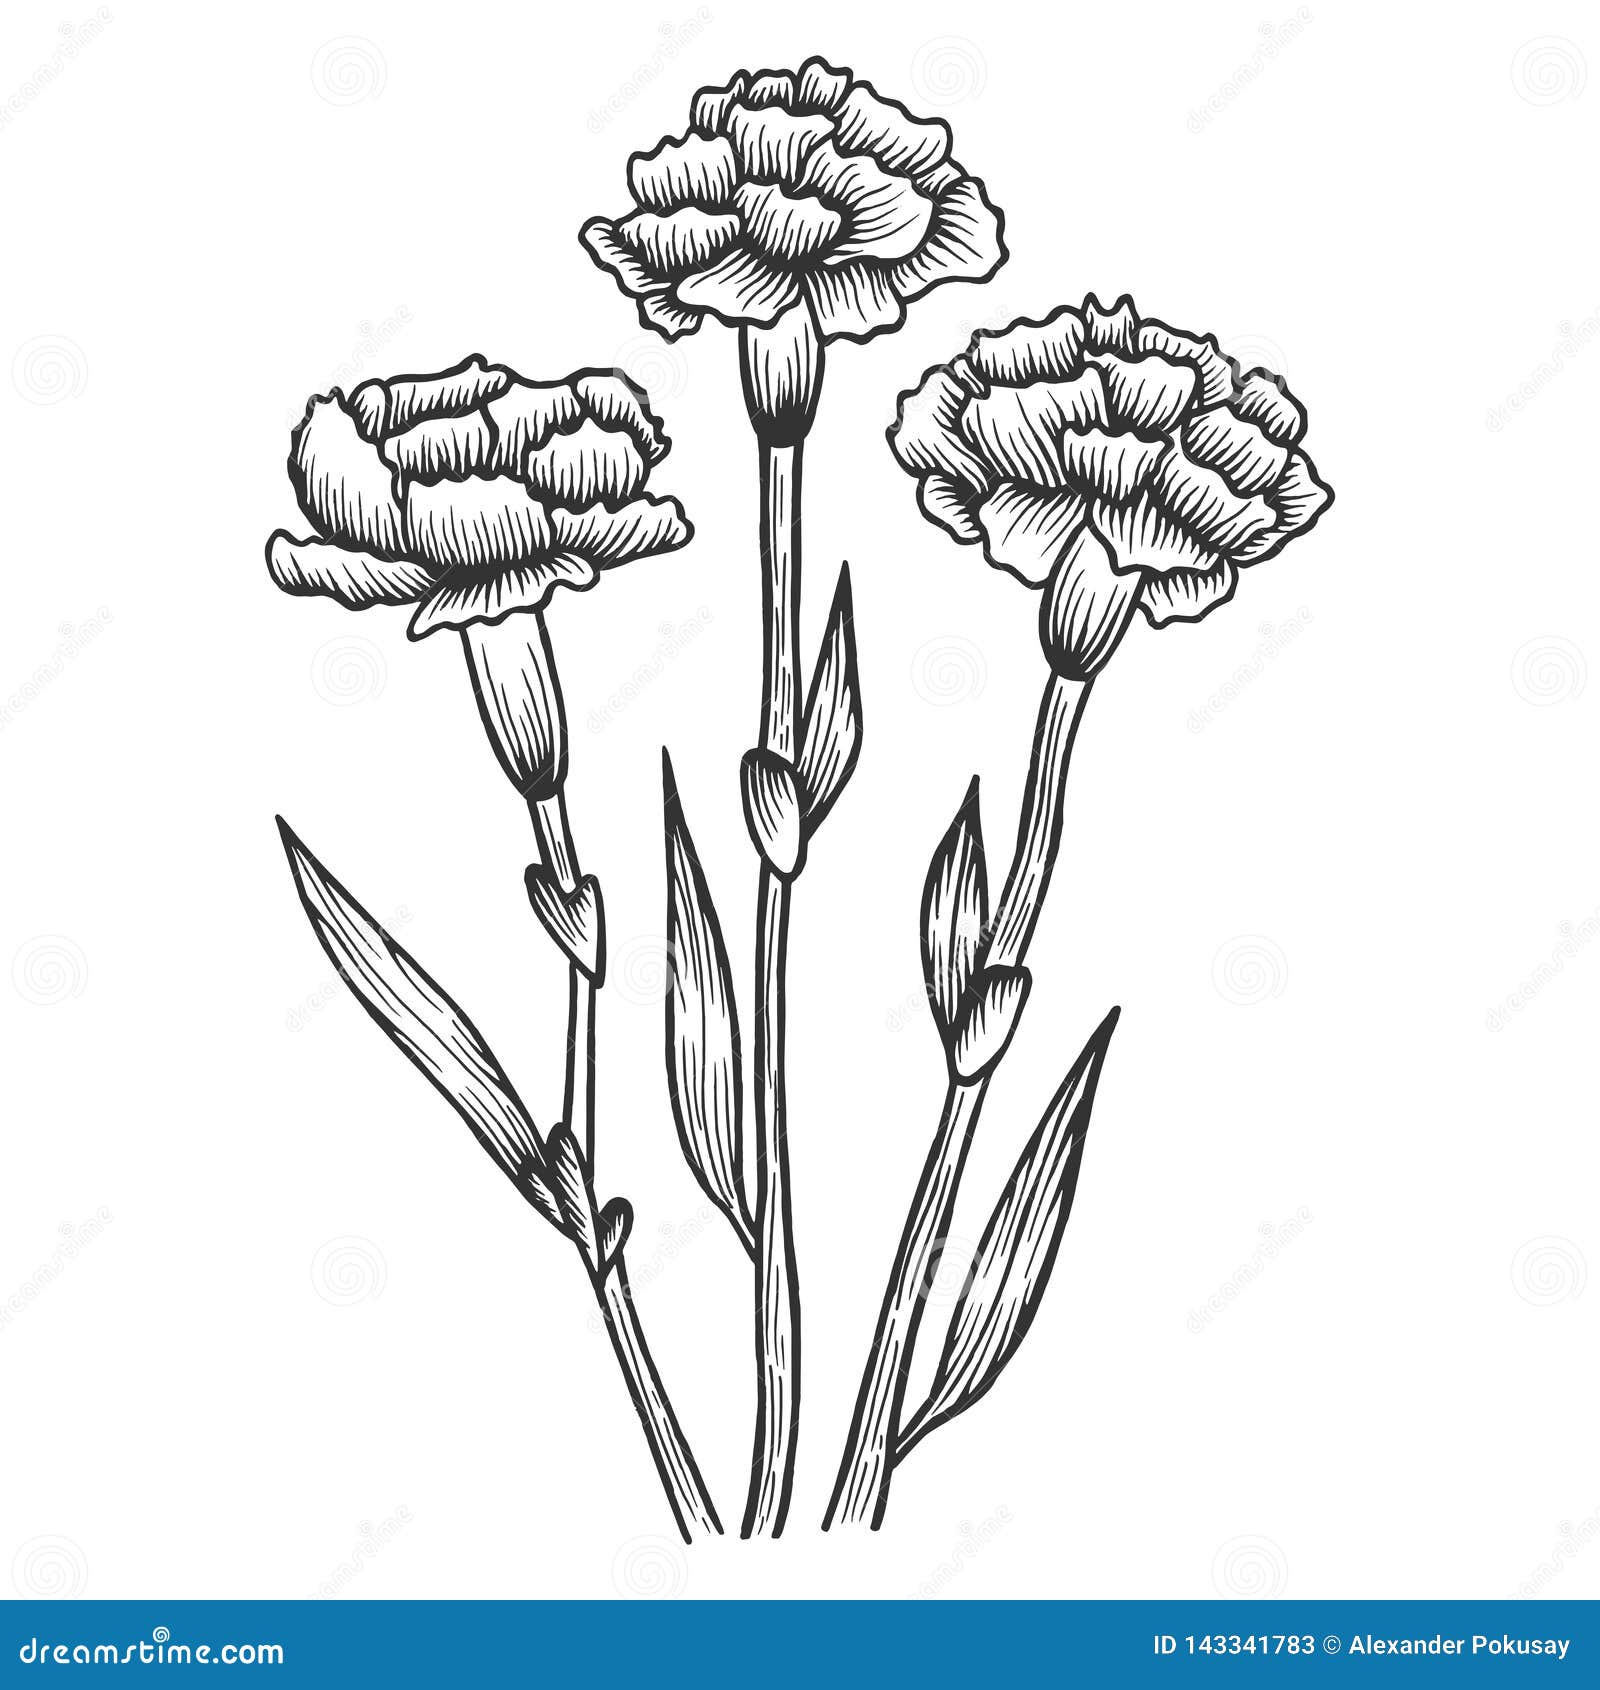 Dianthus Carnation Flowers Sketch Engraving Vector Stock Vector ...